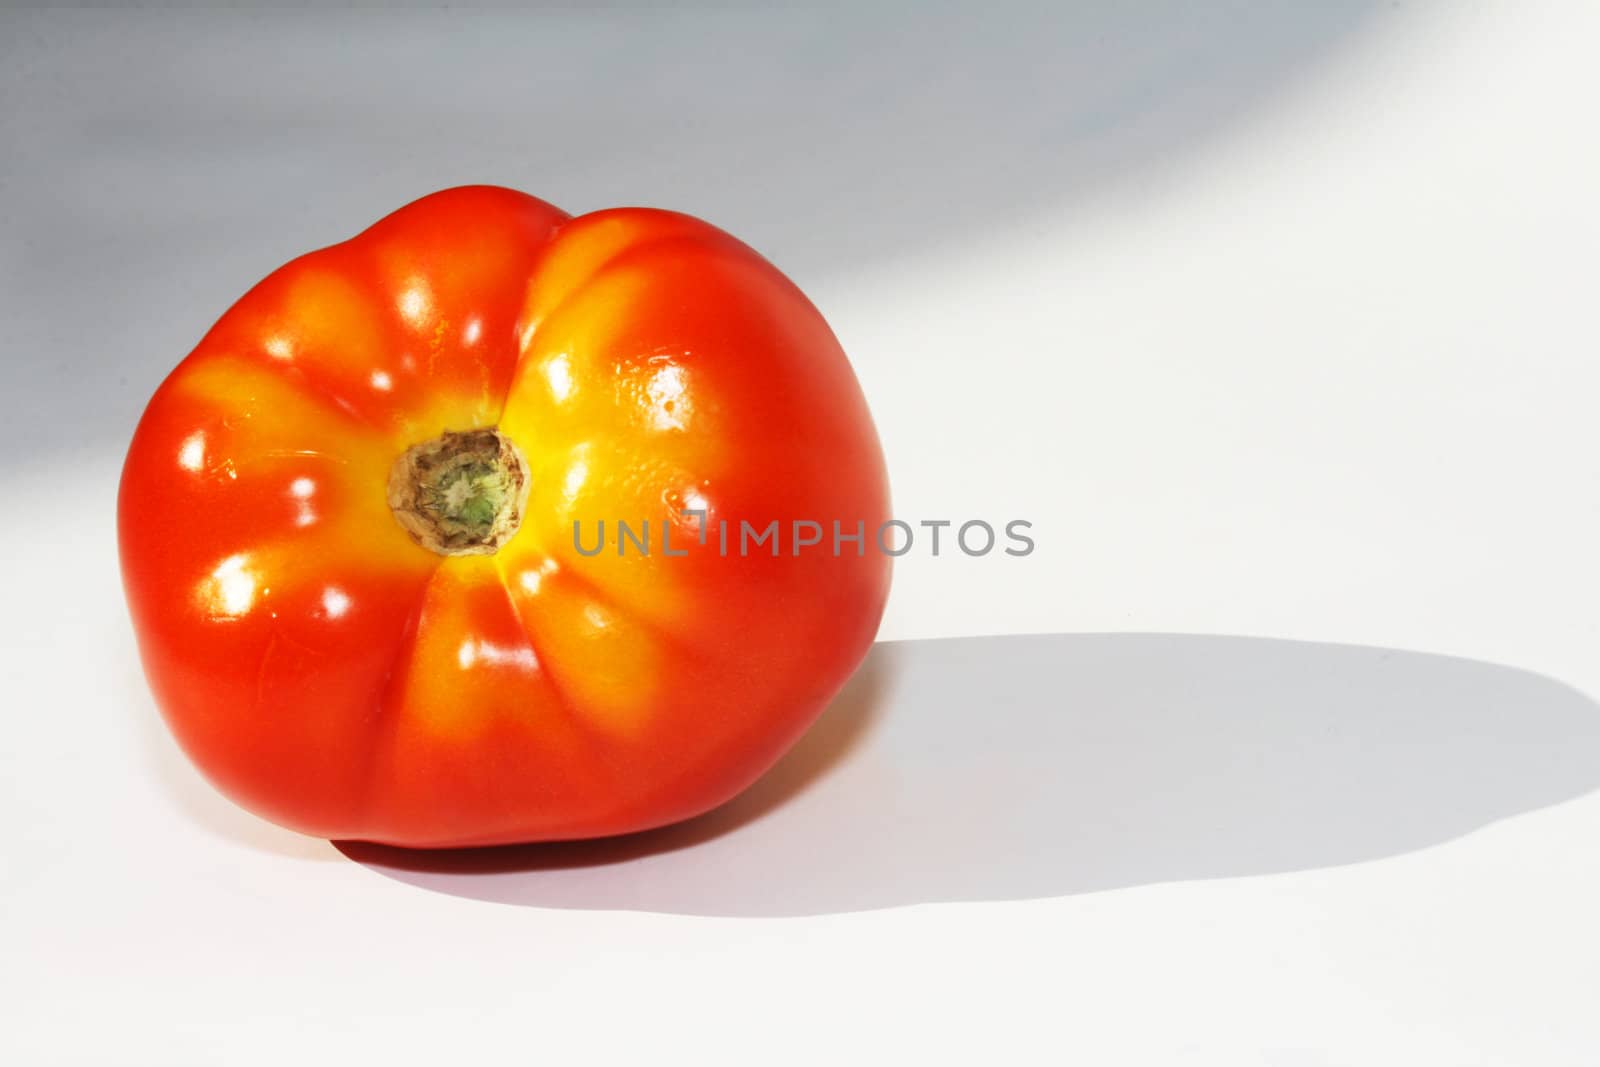 Red tomato with yellow markings on white background